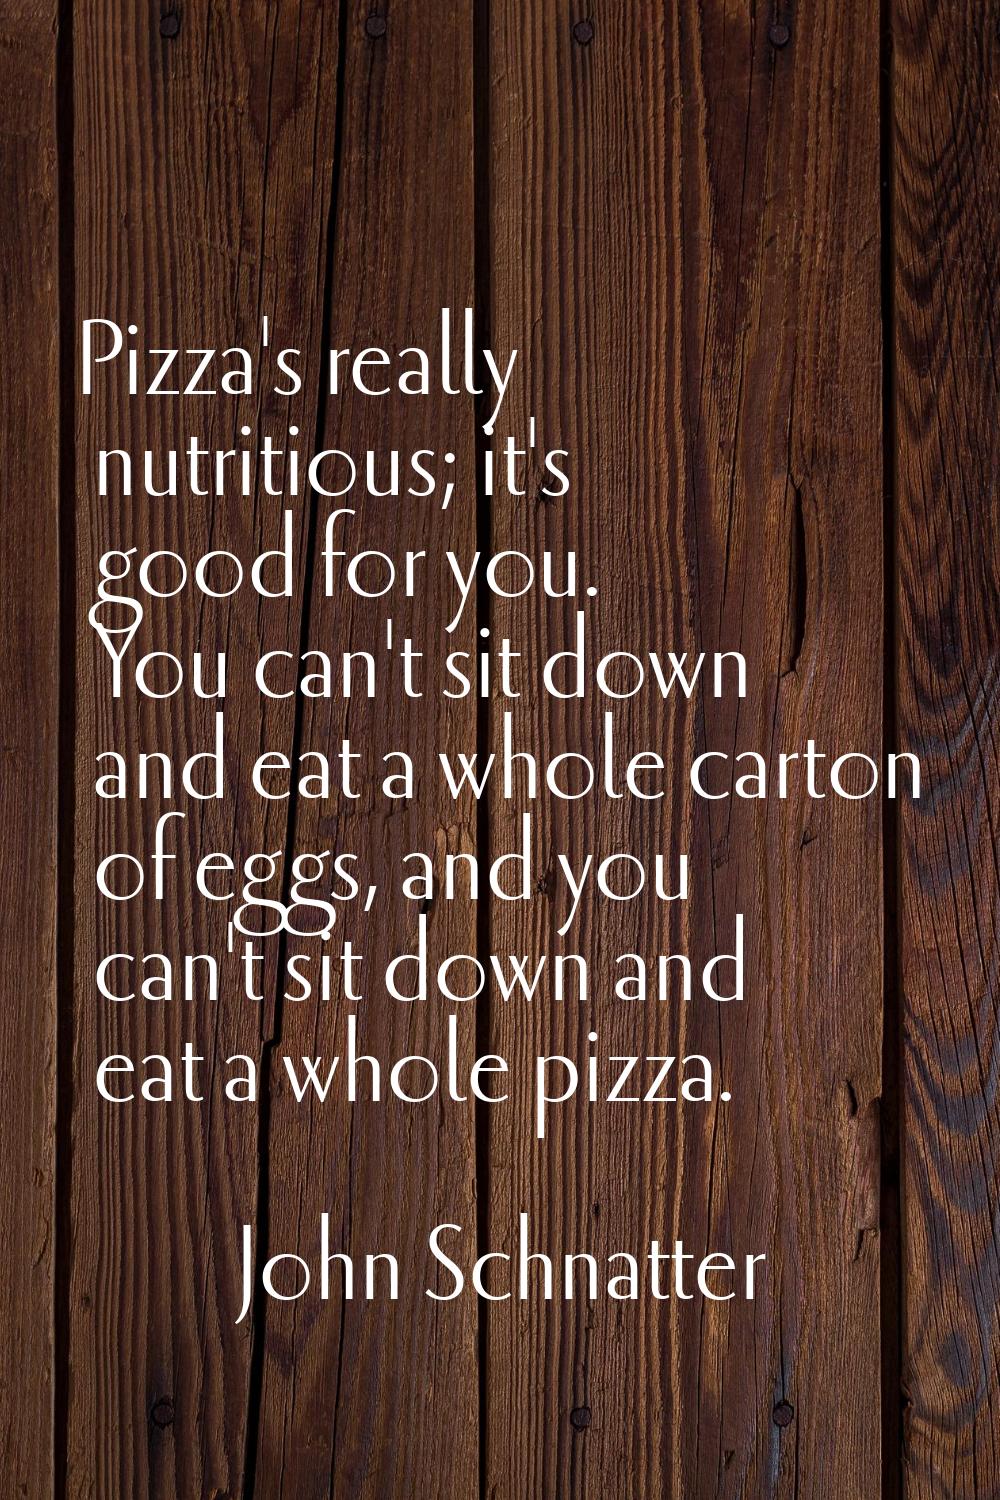 Pizza's really nutritious; it's good for you. You can't sit down and eat a whole carton of eggs, an